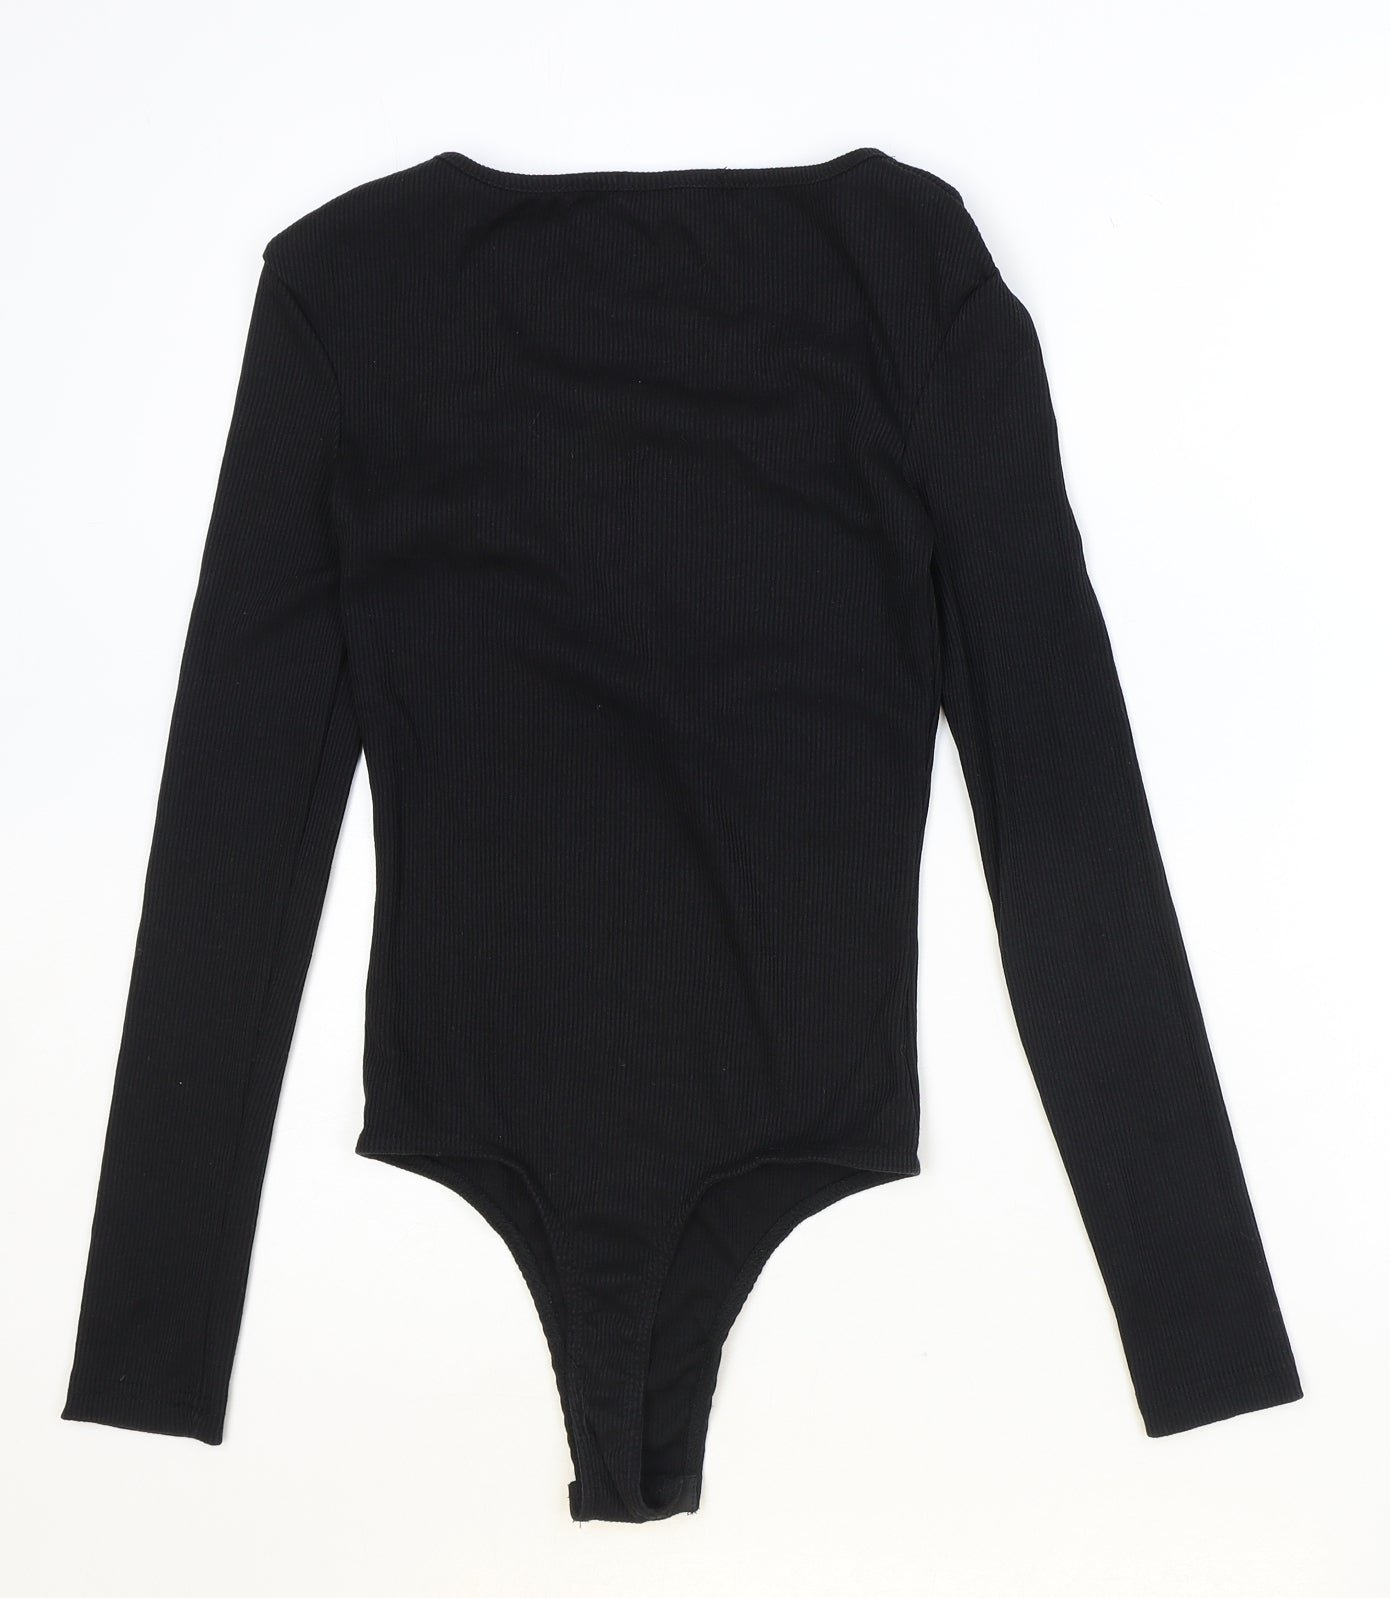 Missguided Womens Black Polyester Bodysuit One-Piece Size 8 Zip